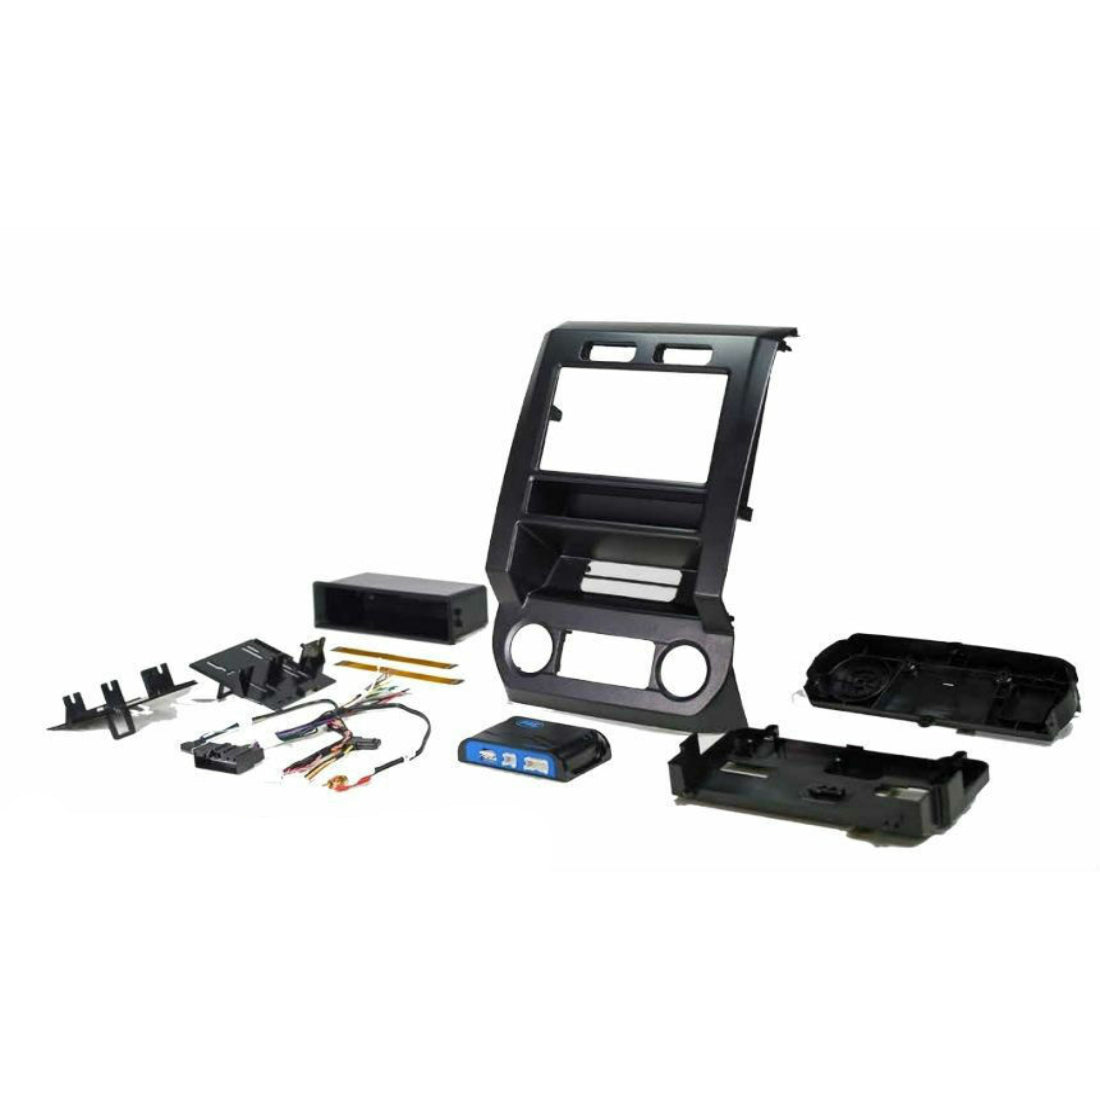 PAC RPK4-FD2201 New 2017 Ford F-150 Fully Loaded Radio Dash Replacement Kit w/Climate Controls